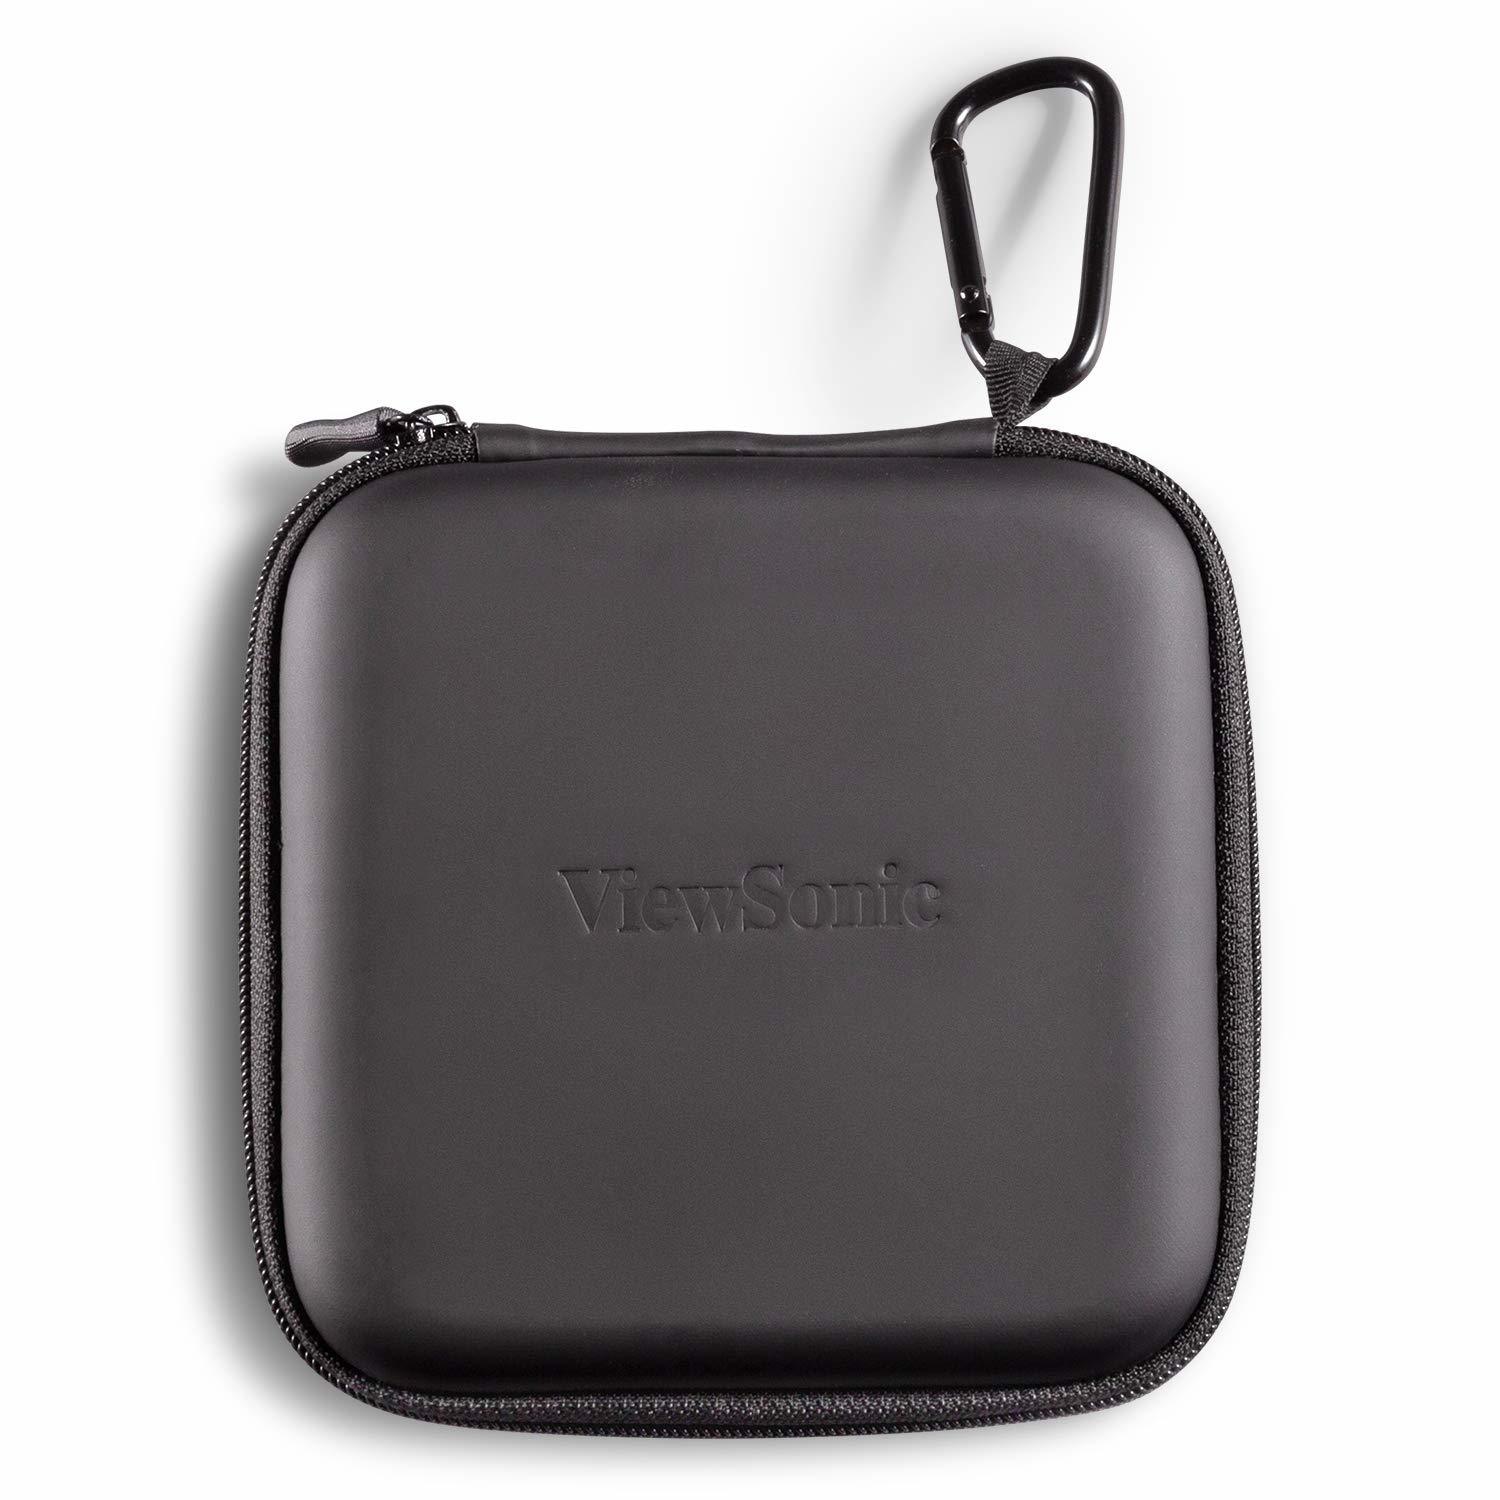 ViewSonic Projector Carrying case for M1 Mini, M1 Mini Plus - $61.99